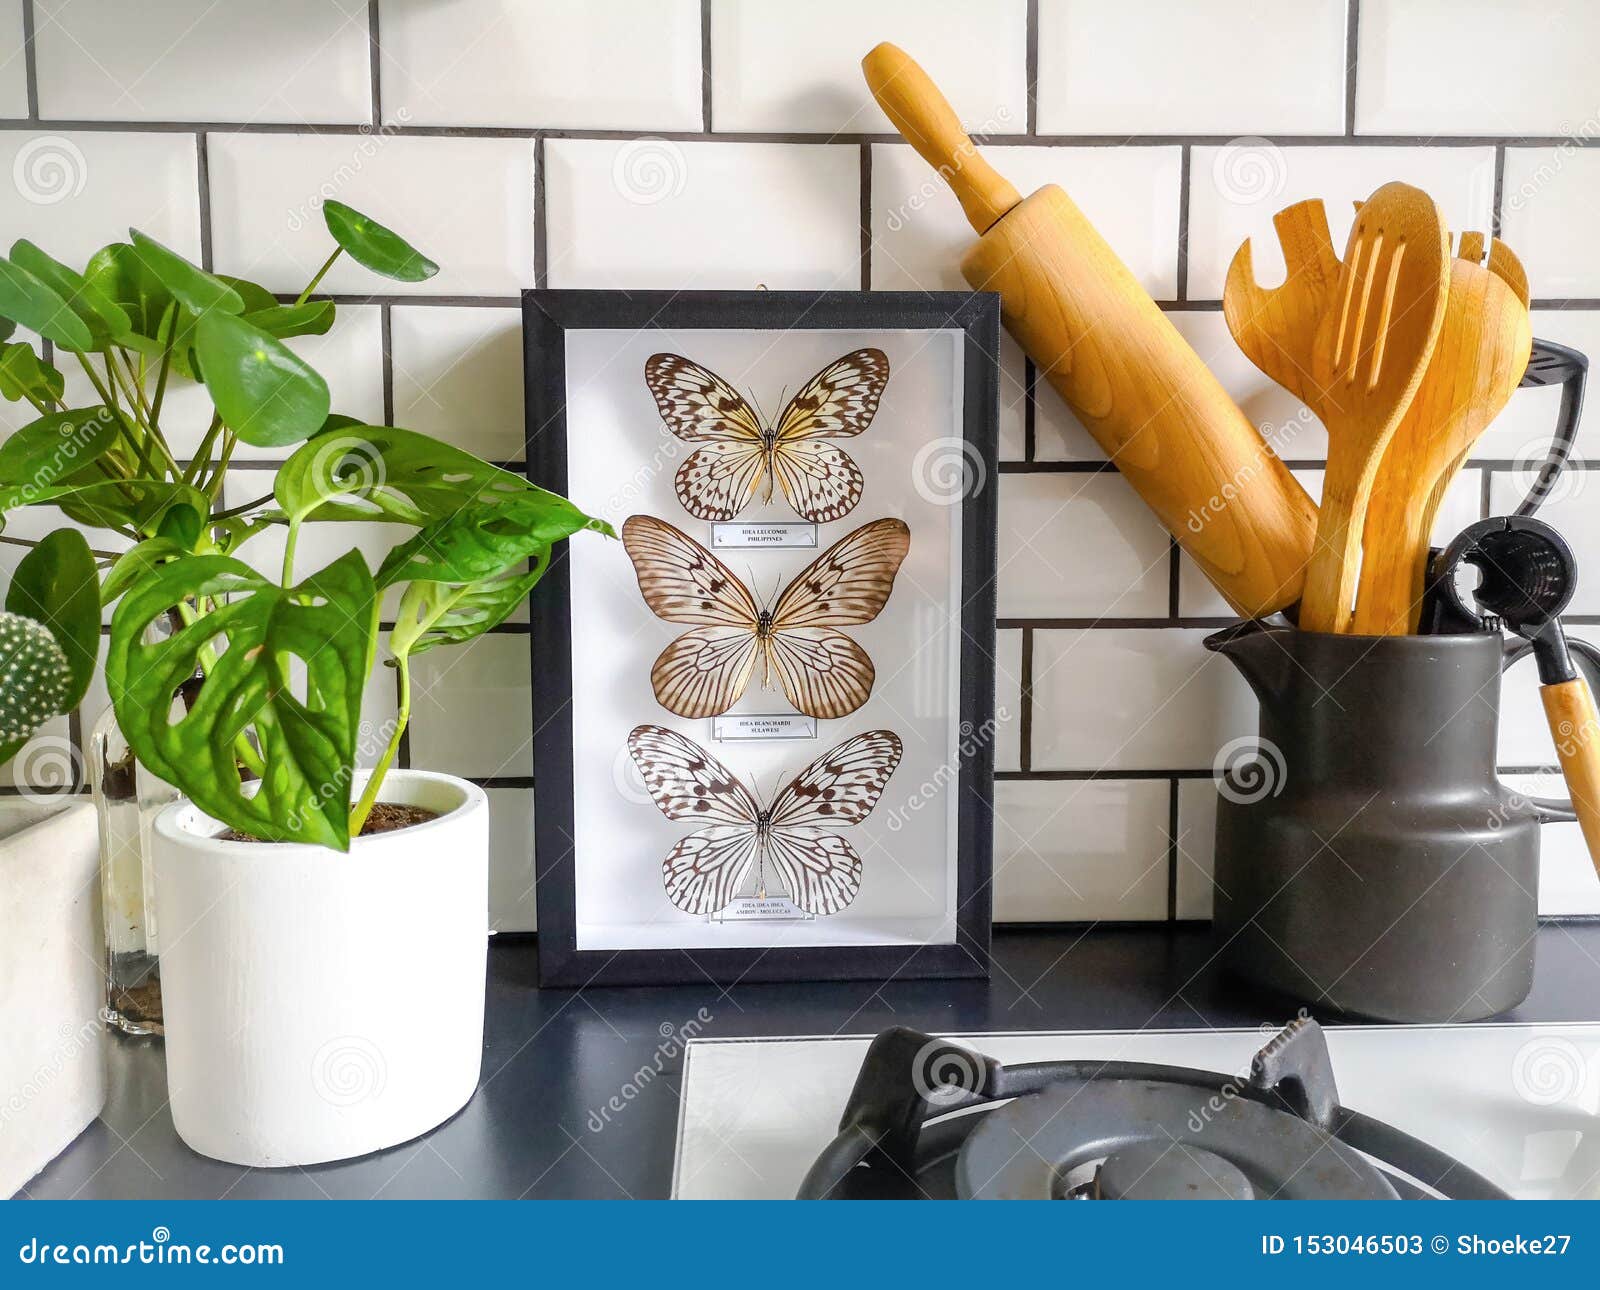 frames butterflies taxidermy display in a black and white subway tiled kitchen with numerous plants and cooking utensils